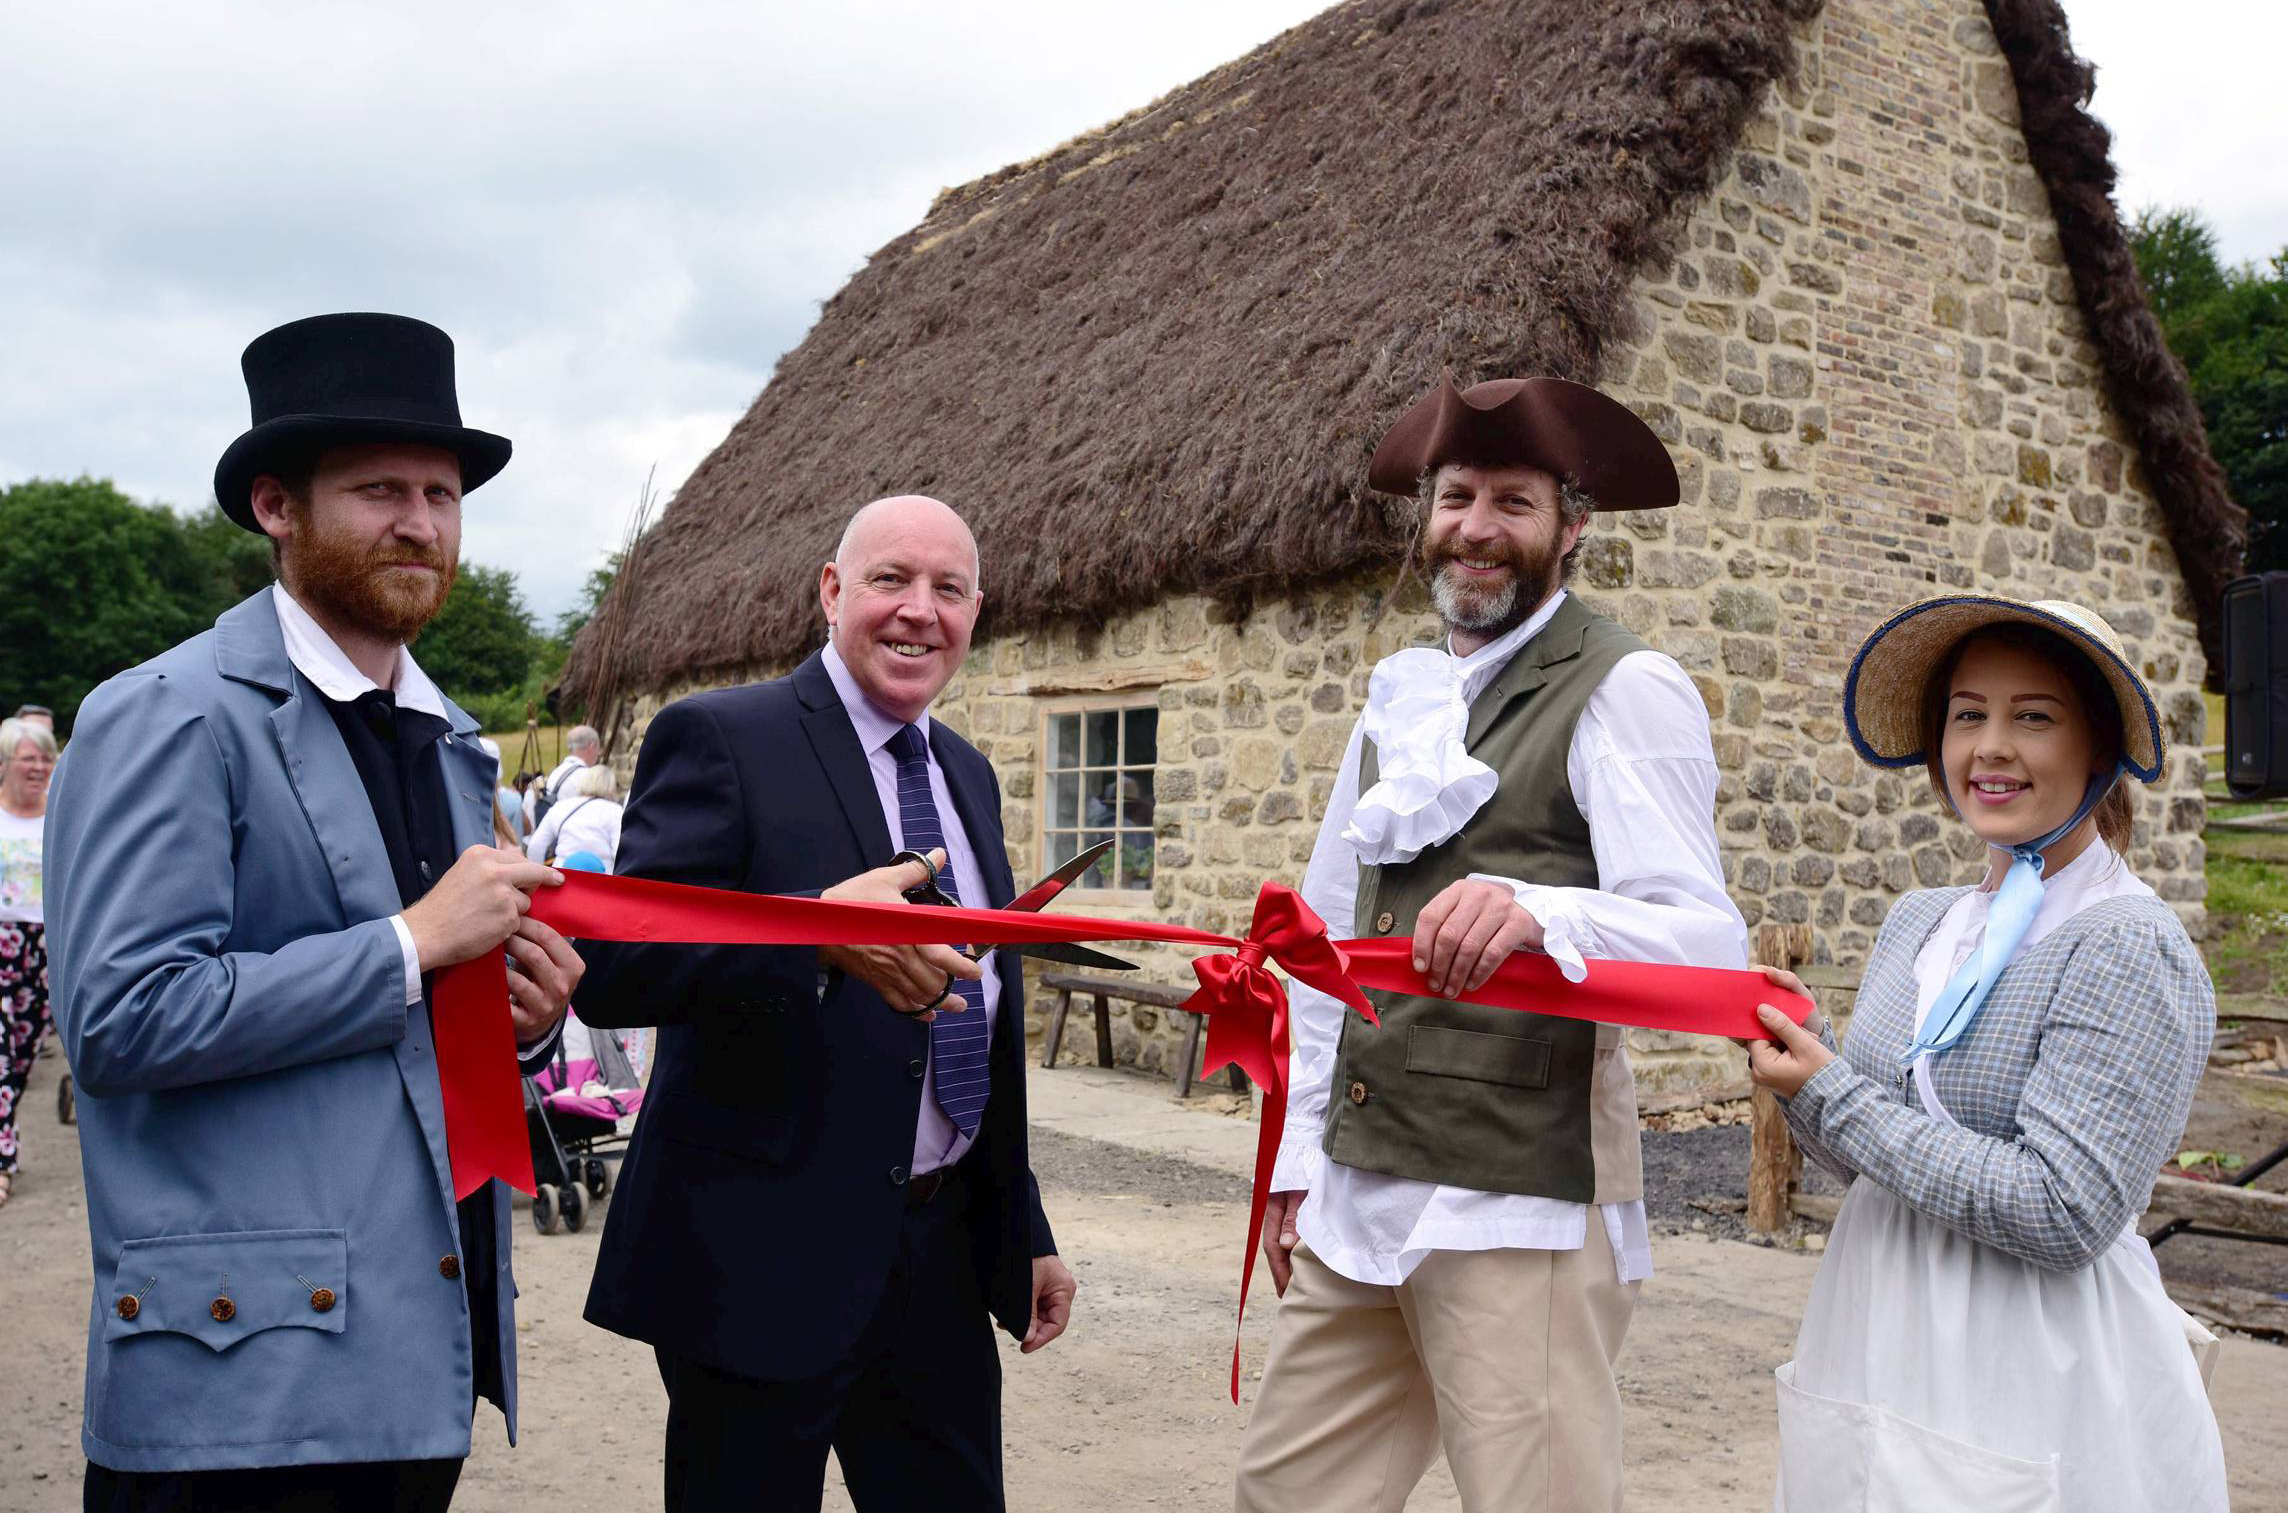 Pictured is Ivor Crowther from Heritage Lottery Fund and Beamish Director Richard Evans